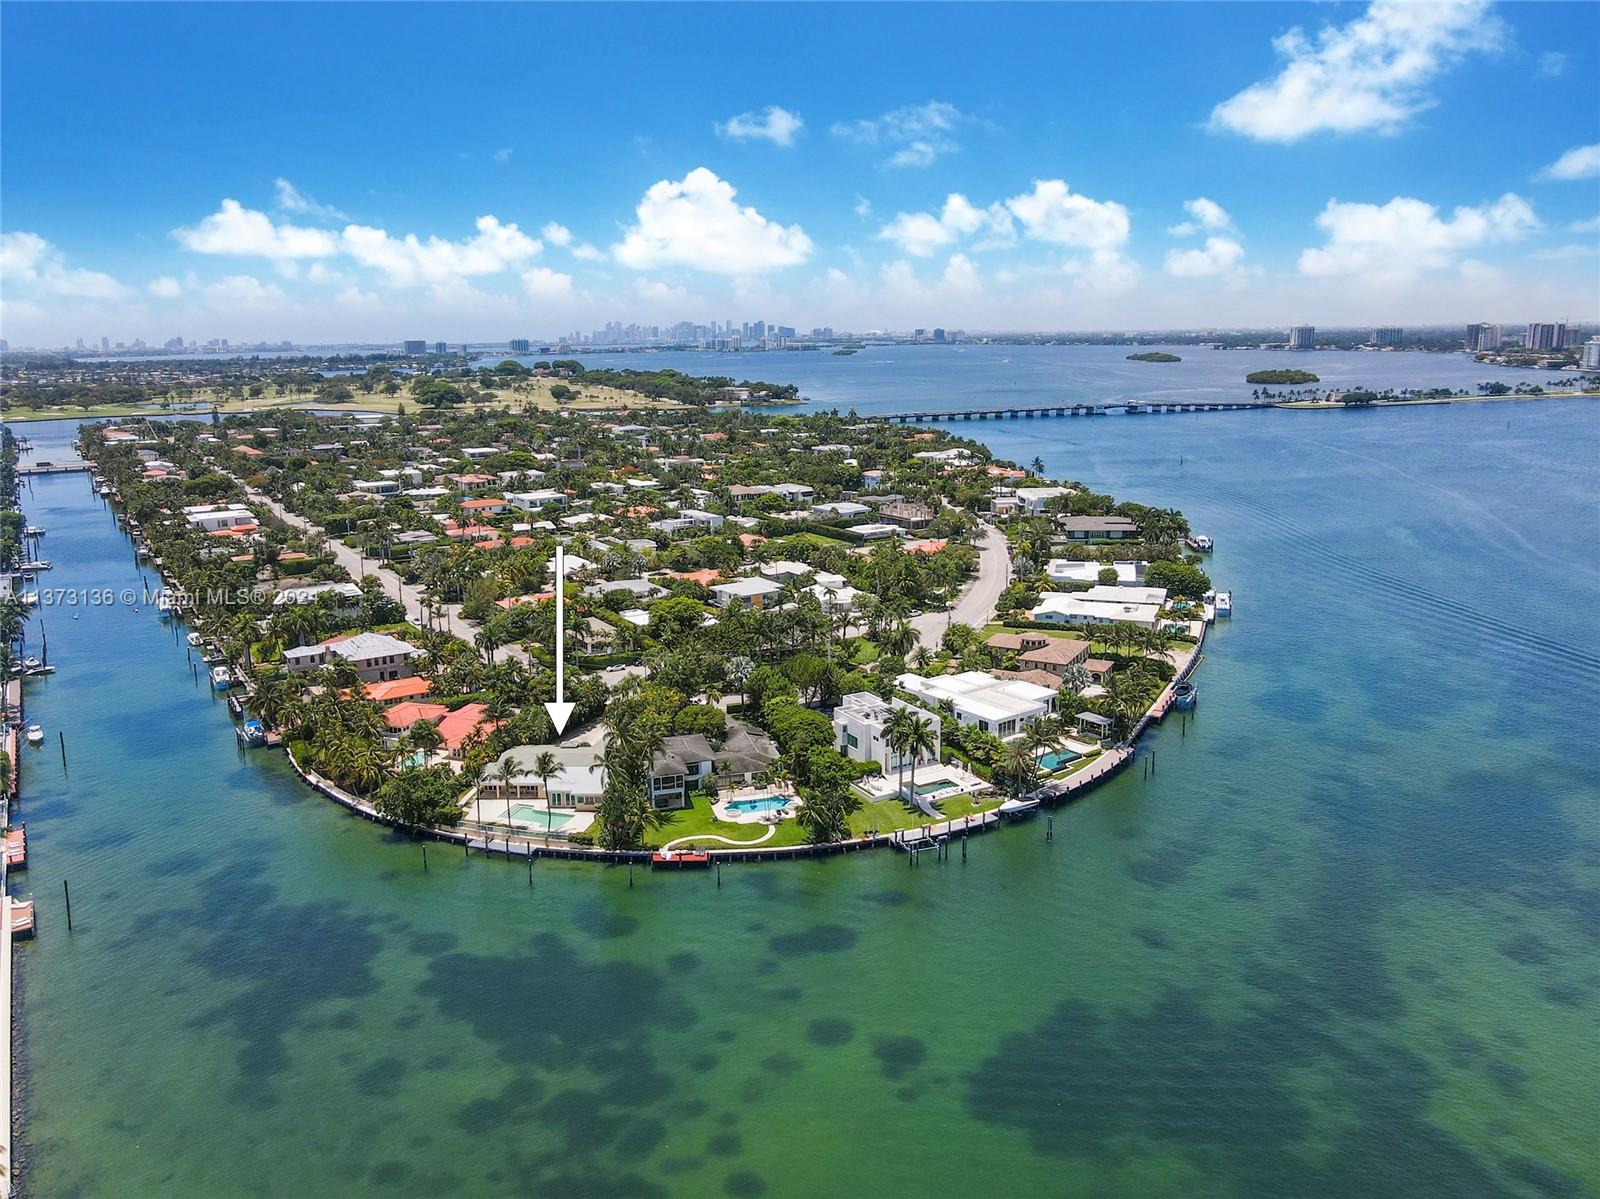 Fantastic Development Opportunity on the North End of Bay Harbor Islands! Oversized 19,738 SF lot with spectacular intracoastal views. 117 ft. of prime water frontage. Build your dream home on this unique lot or renovate this 6 bedroom 6 1/2 bath home which features chef's kitchen with top of the line appliances, impact windows and doors, full house generator plus much more!